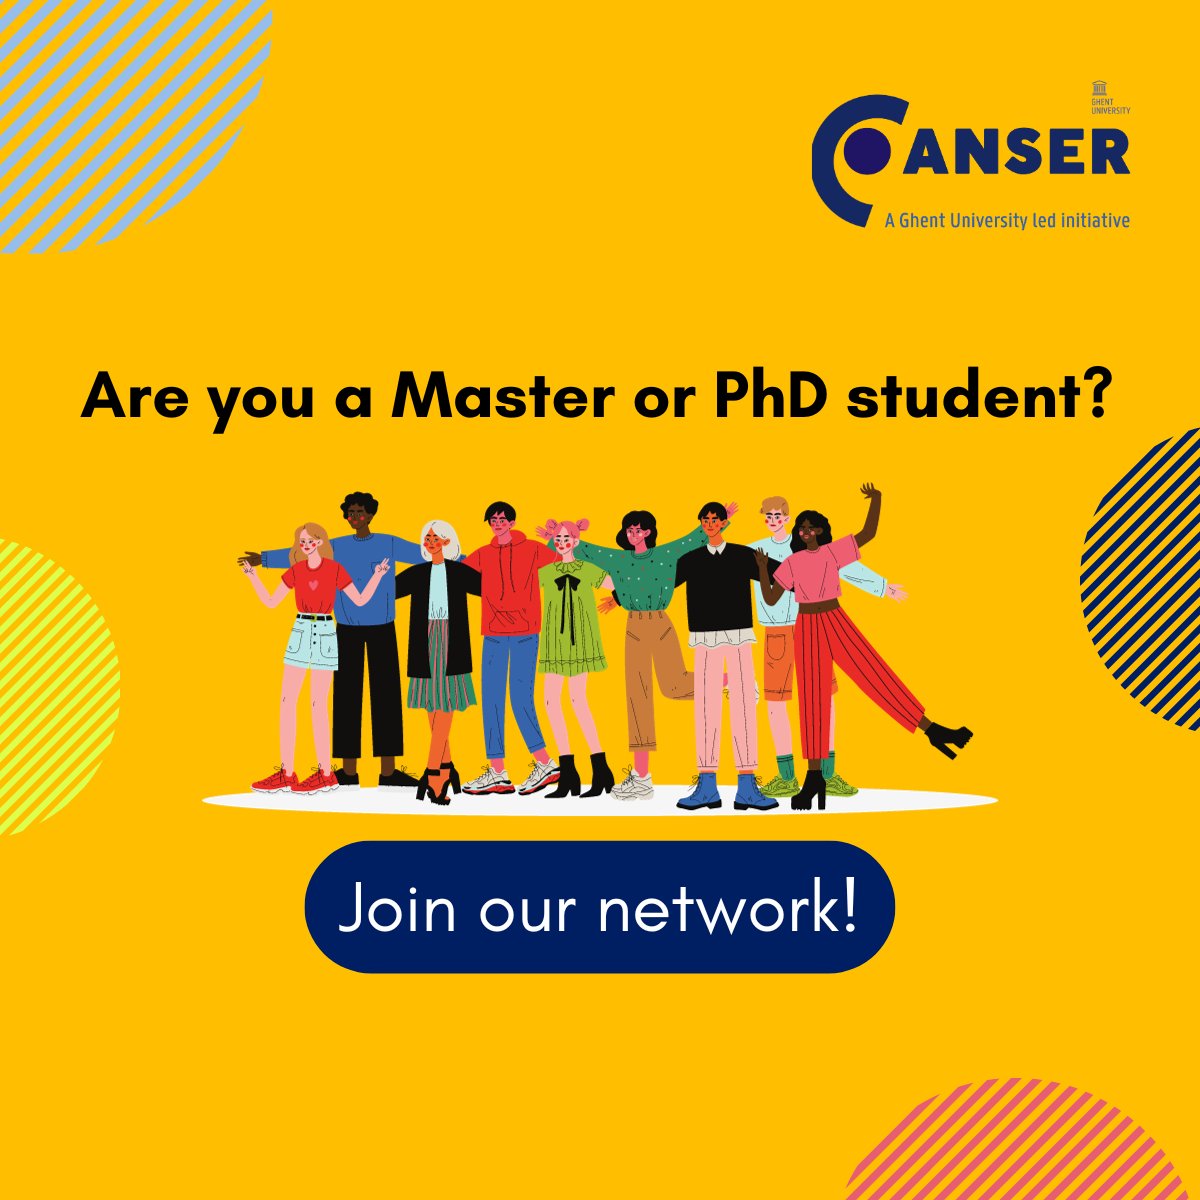 Are you a student interest in #SRHR? ANSER is opening its Master's Students Network & PhD Network for new students interested in sexual and reproductive health and rights (SRHR)! Please register via ugent.be/anser/en/oppor…